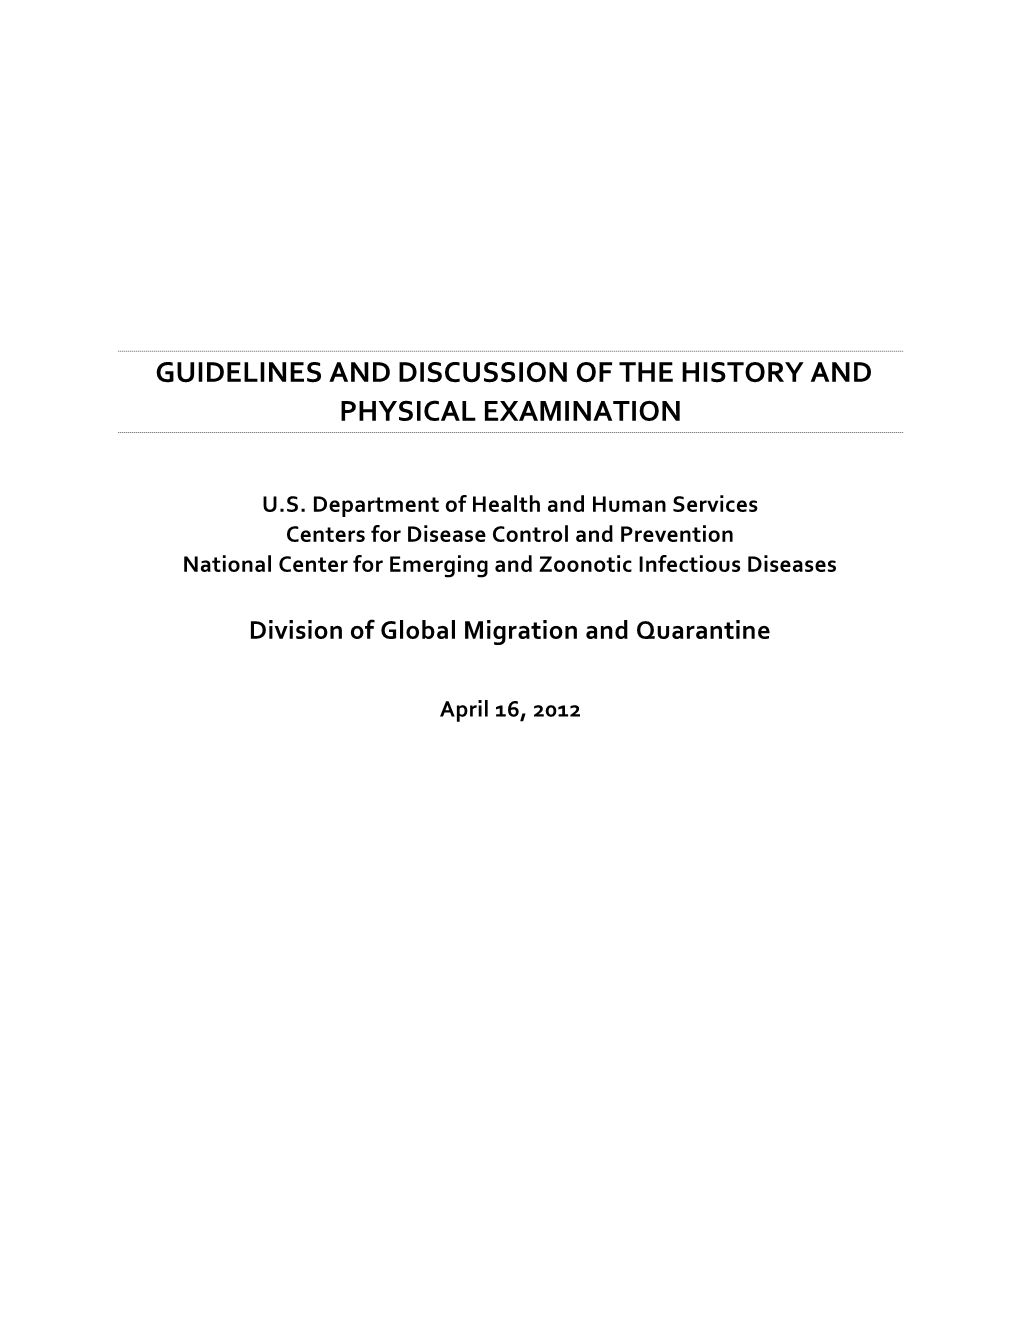 Guidelines and Discussion of the History and Physical Examination